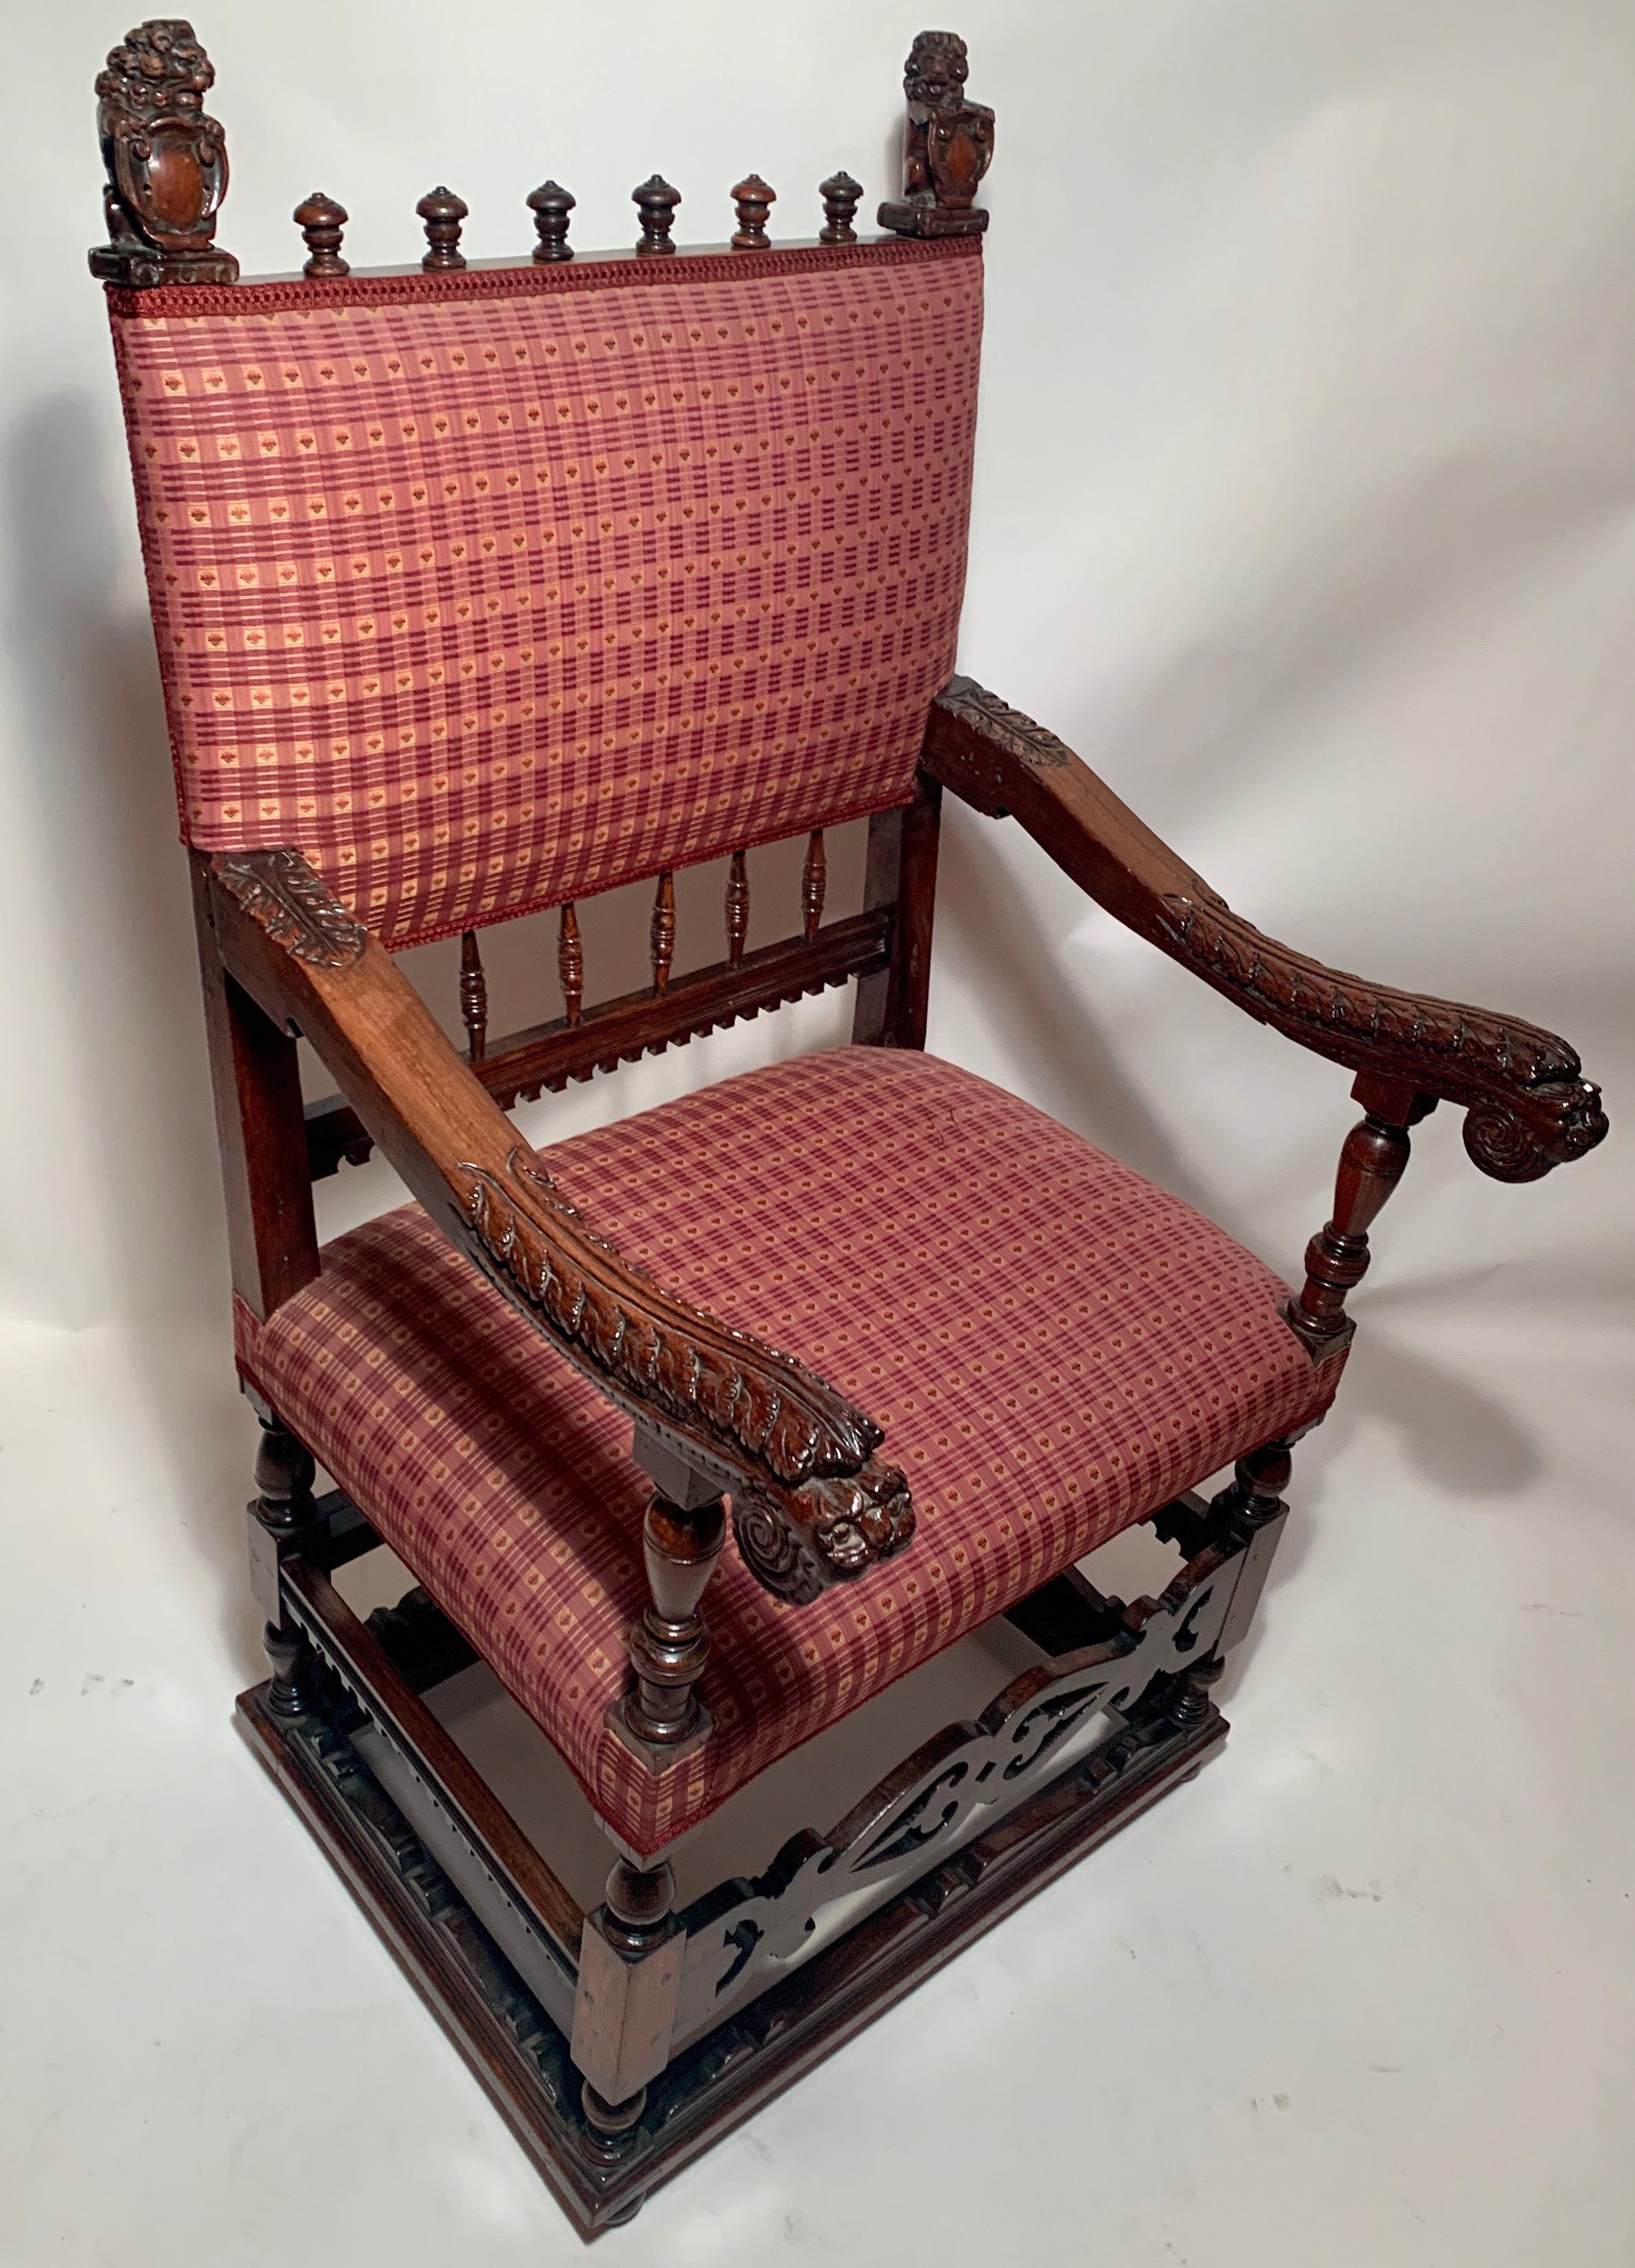 A fine antique armchair from the early 19th century.

